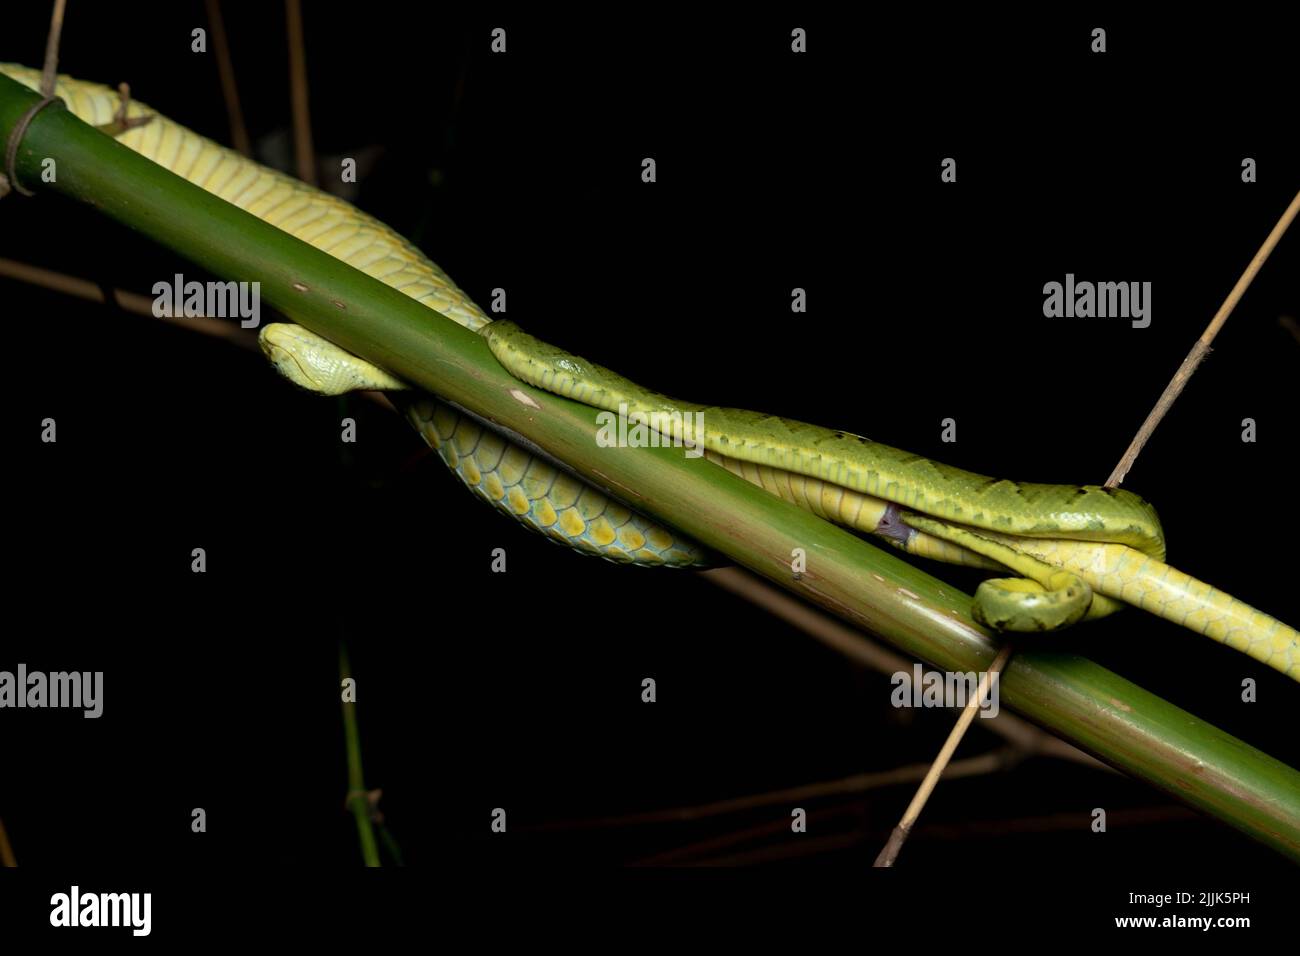 The snake balances on a bamboo branch. Valsad, India: THESE INCREDIBLE images capture a rare site of a snake giving birth, multiple tails extending fr Stock Photo